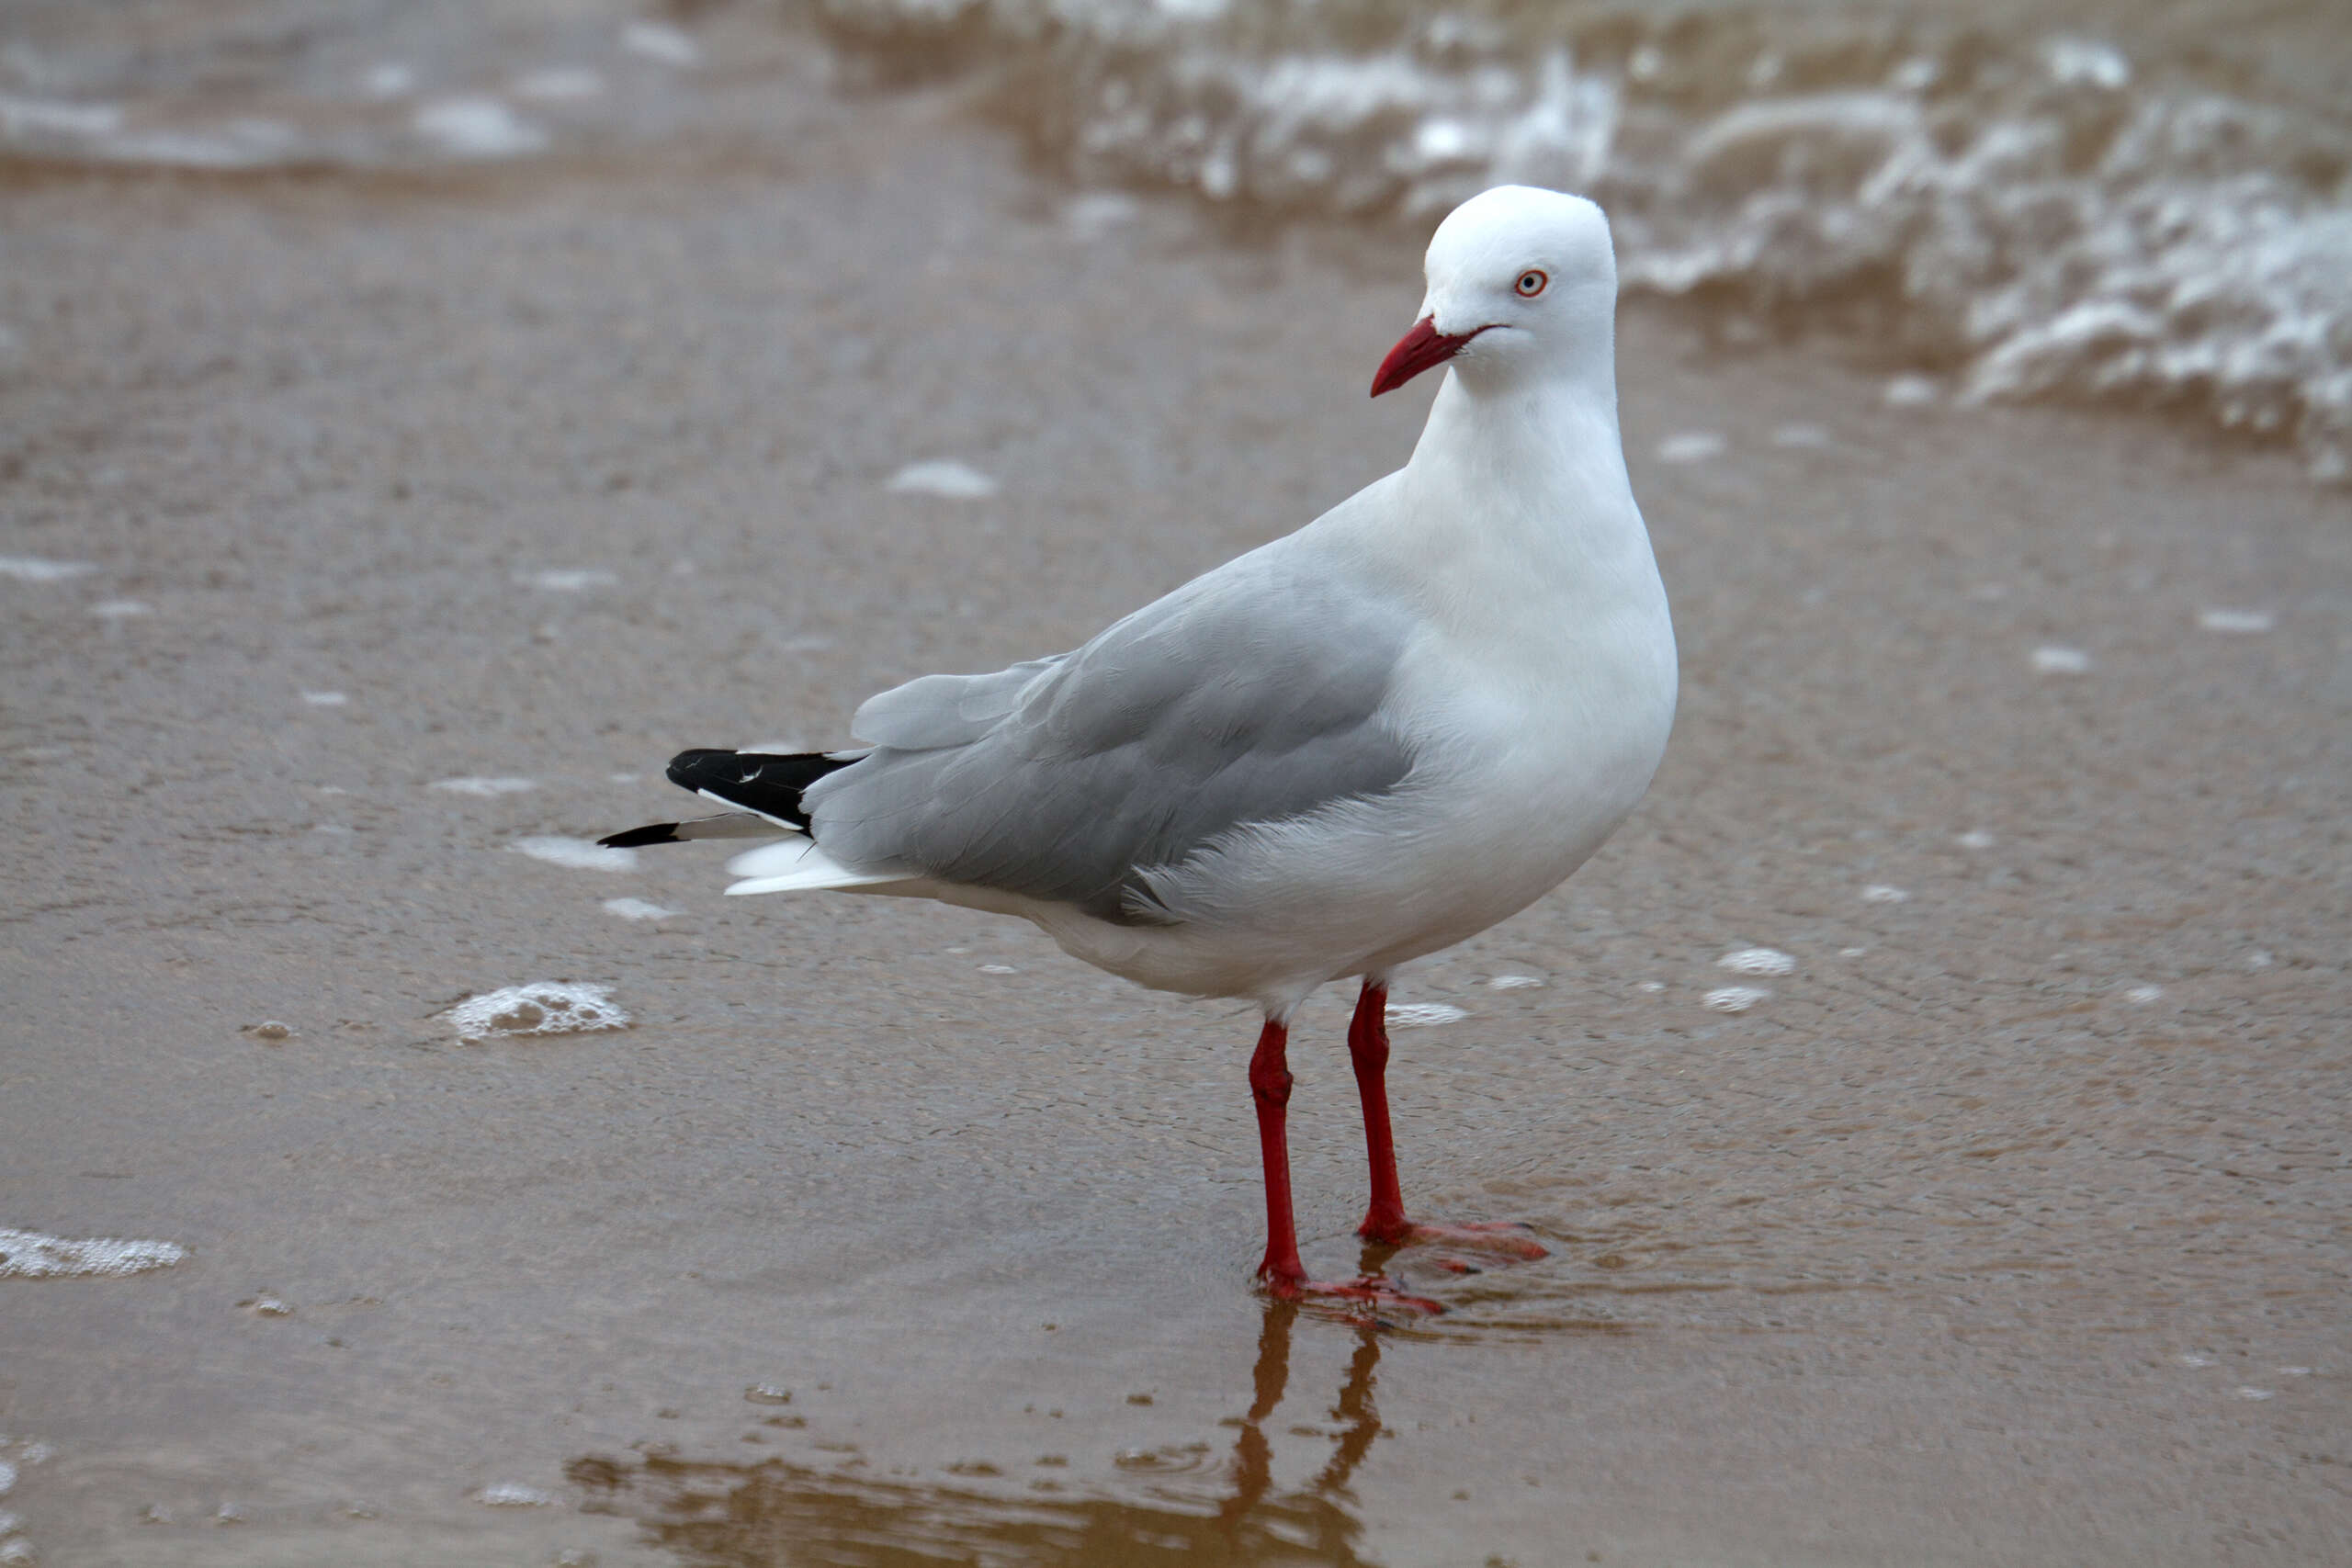 Image of Hooded gulls